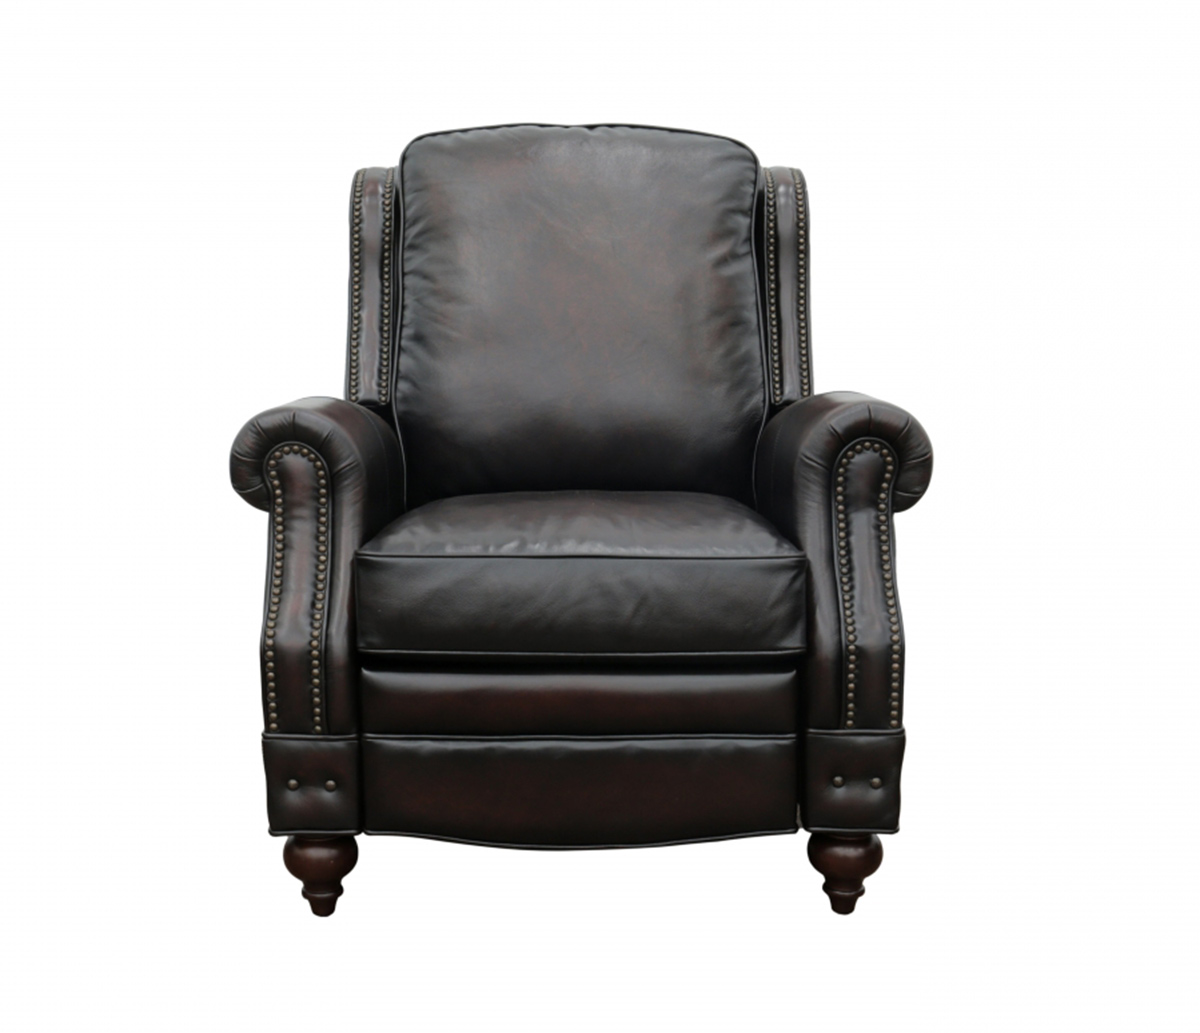 Barcalounger Marysville Recliner Chair - Stetson Coffee/All Leather